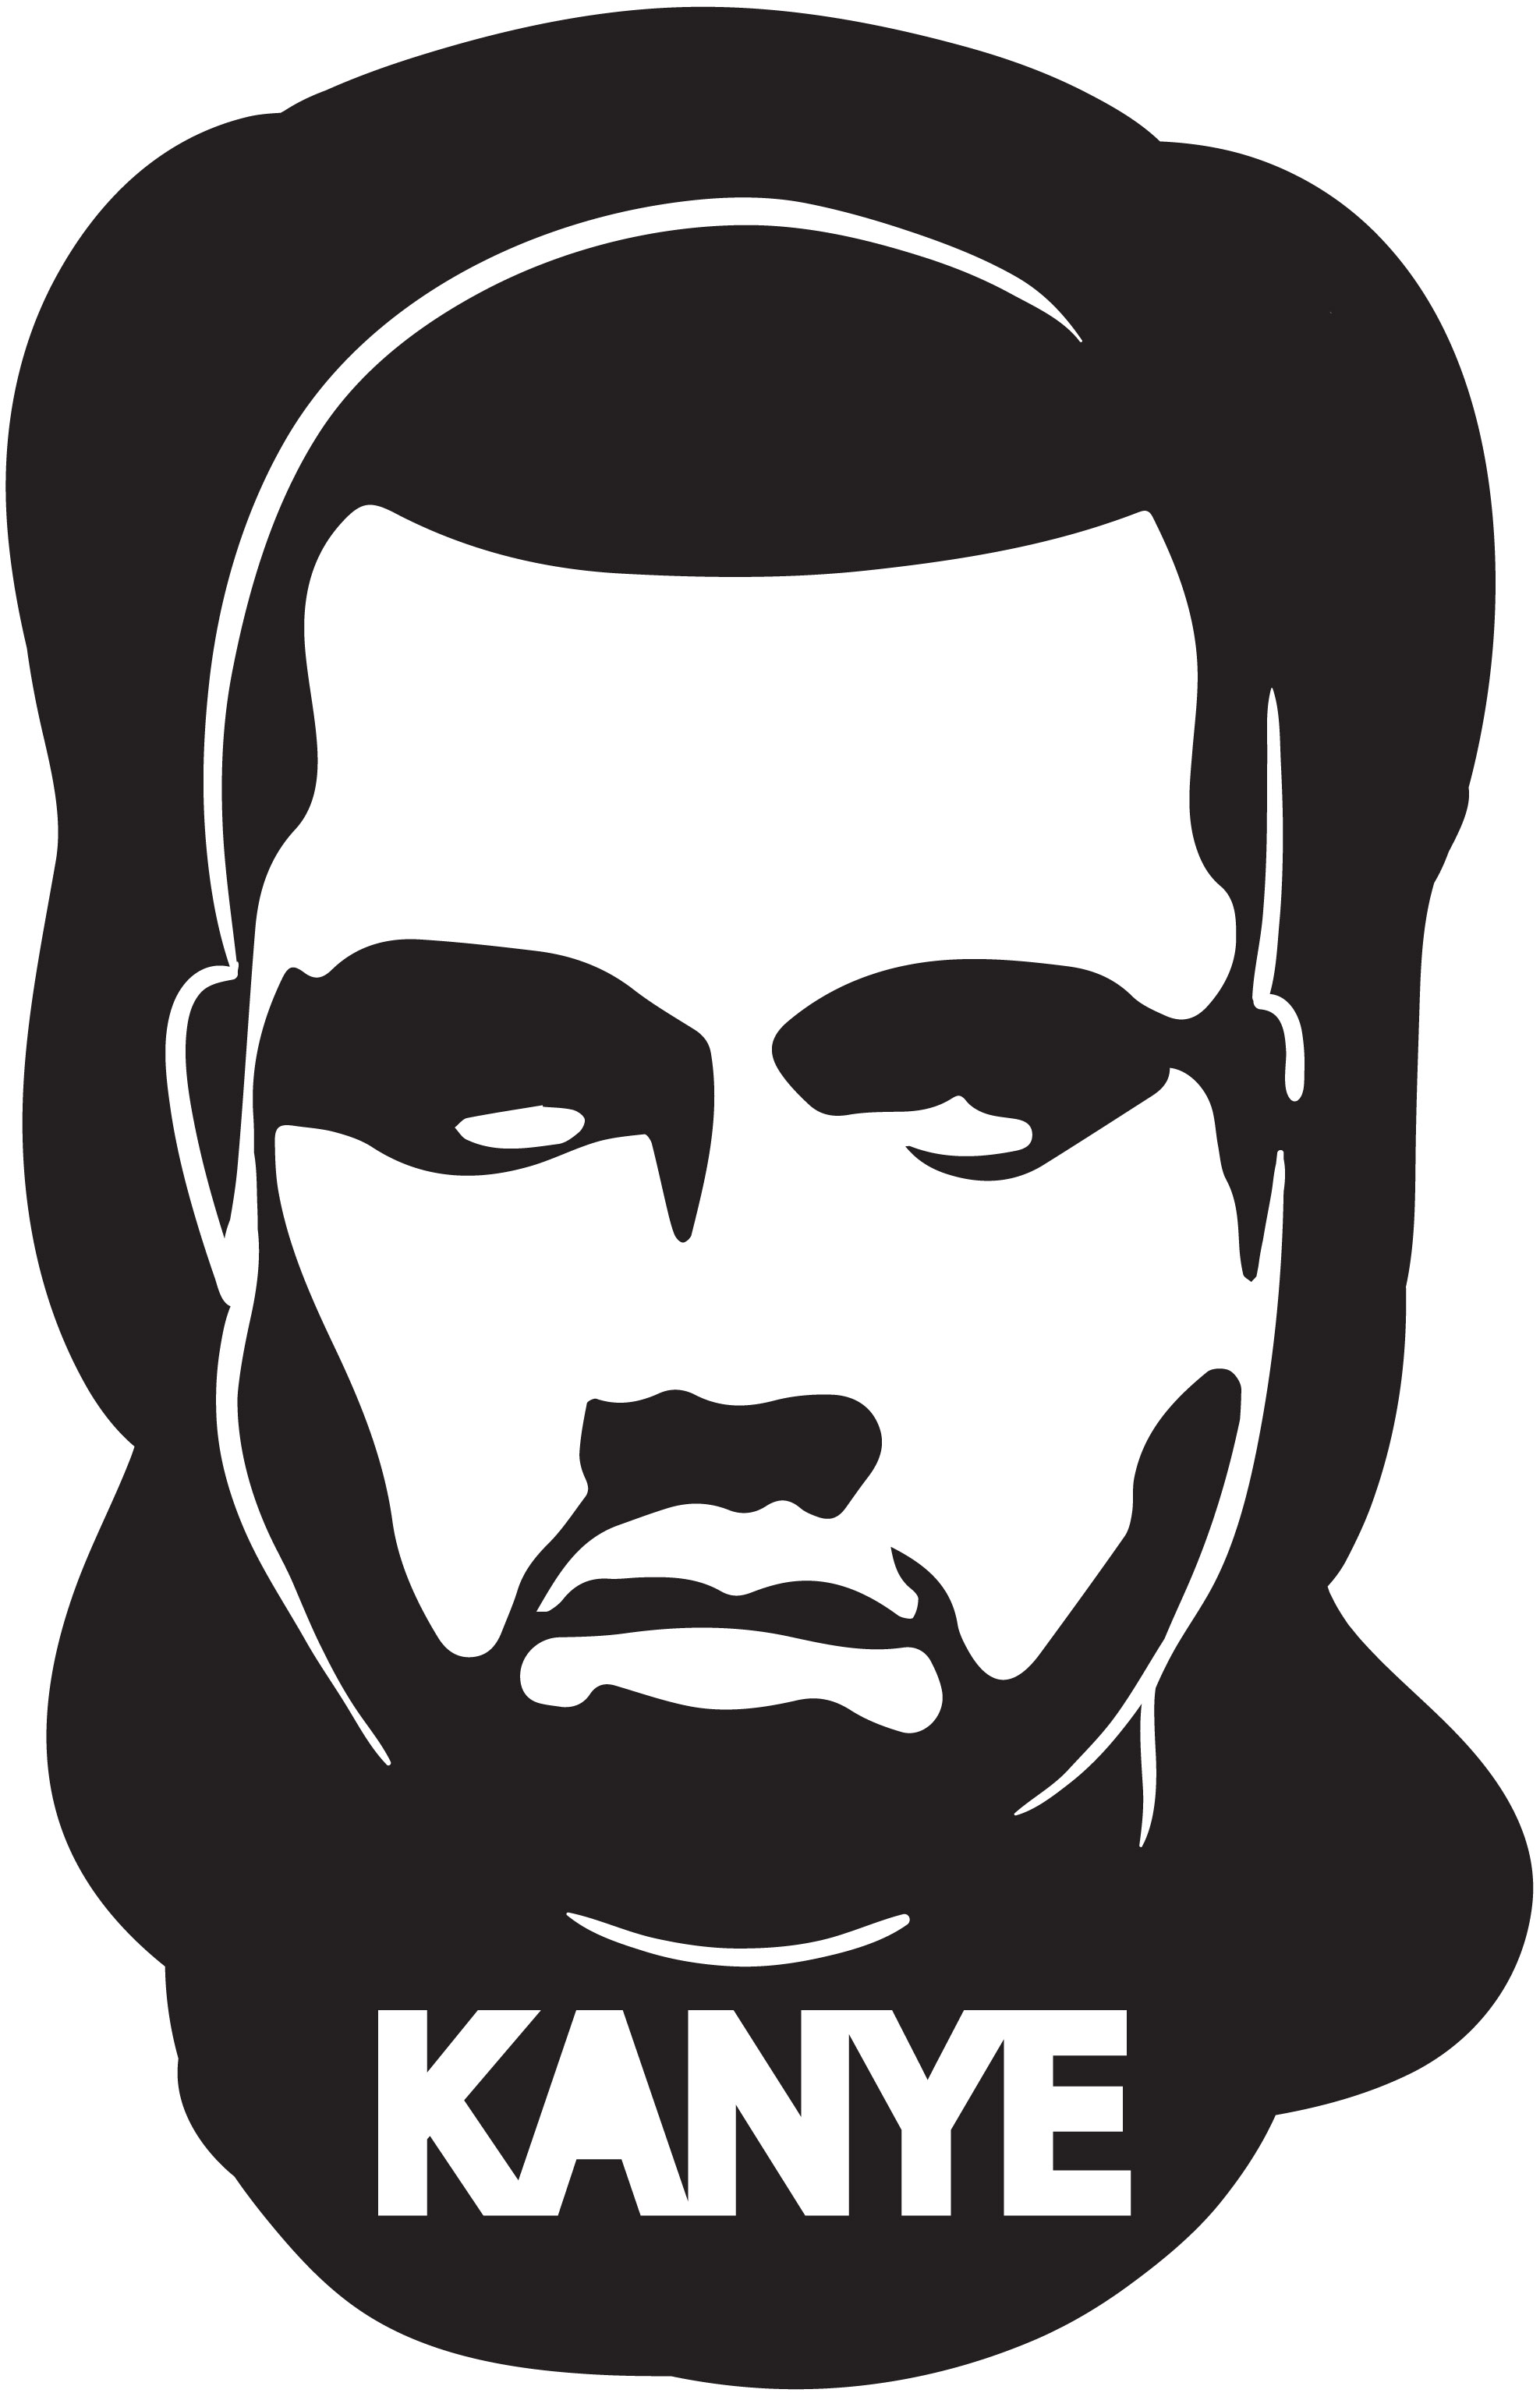 Source: ClipartLook.com  - Kanye West Clipart